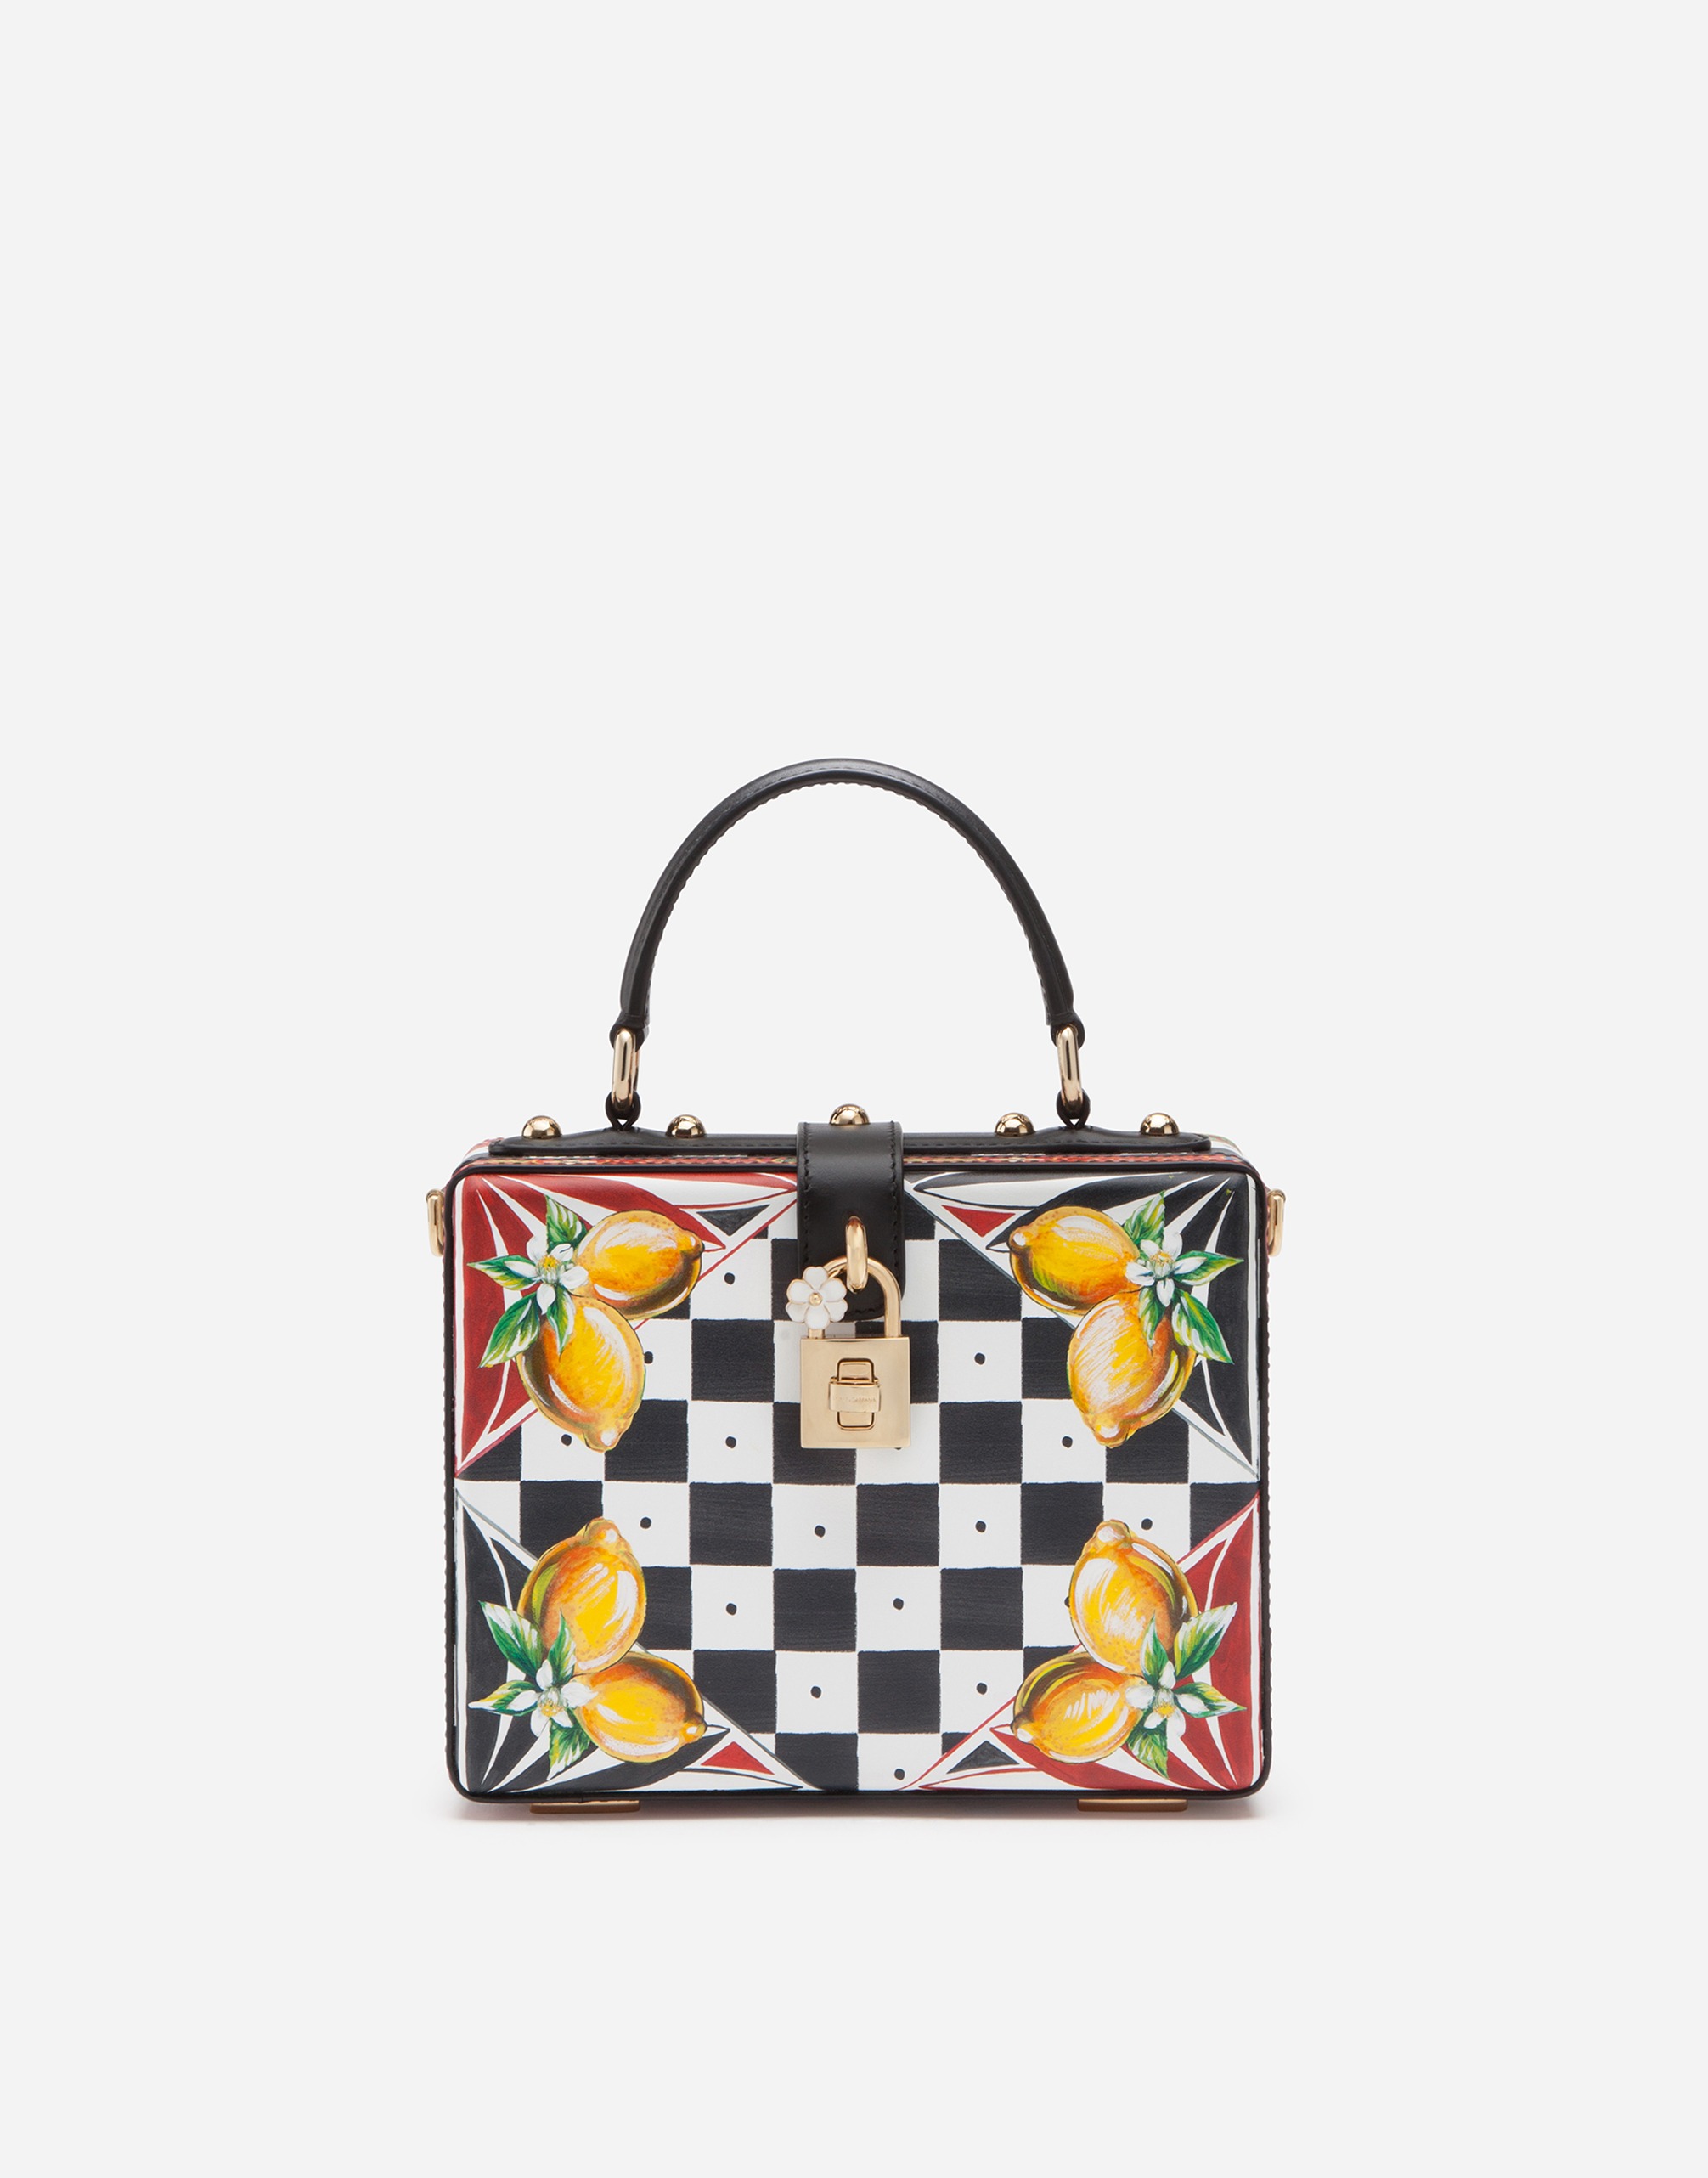 Dauphine calfskin Dolce Box bag with Carretto and lemon print in Multicolor